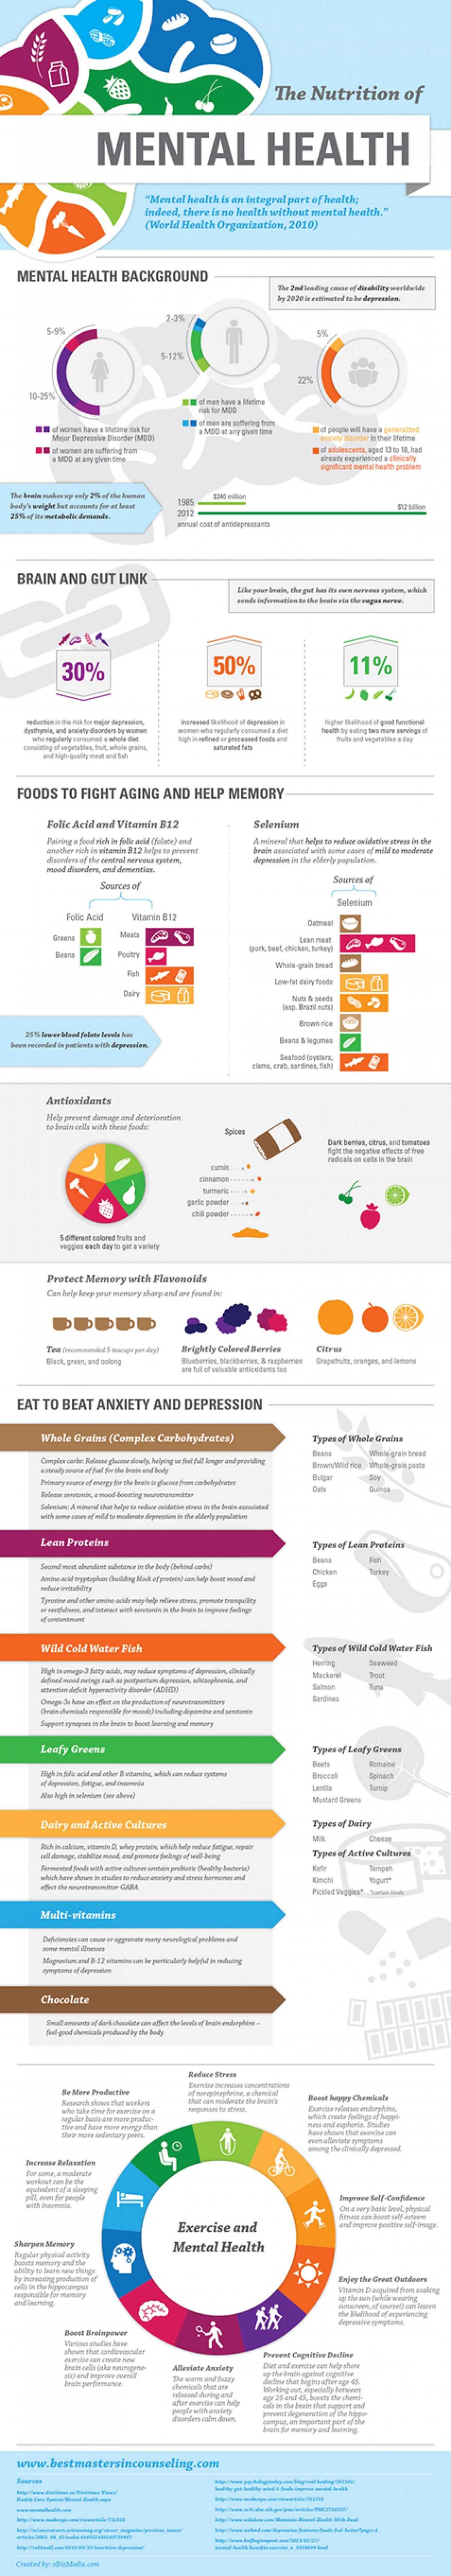 The Nutrition Of Mental Health 46 Health Infographics That You Wish You Knew Years Ago 8917